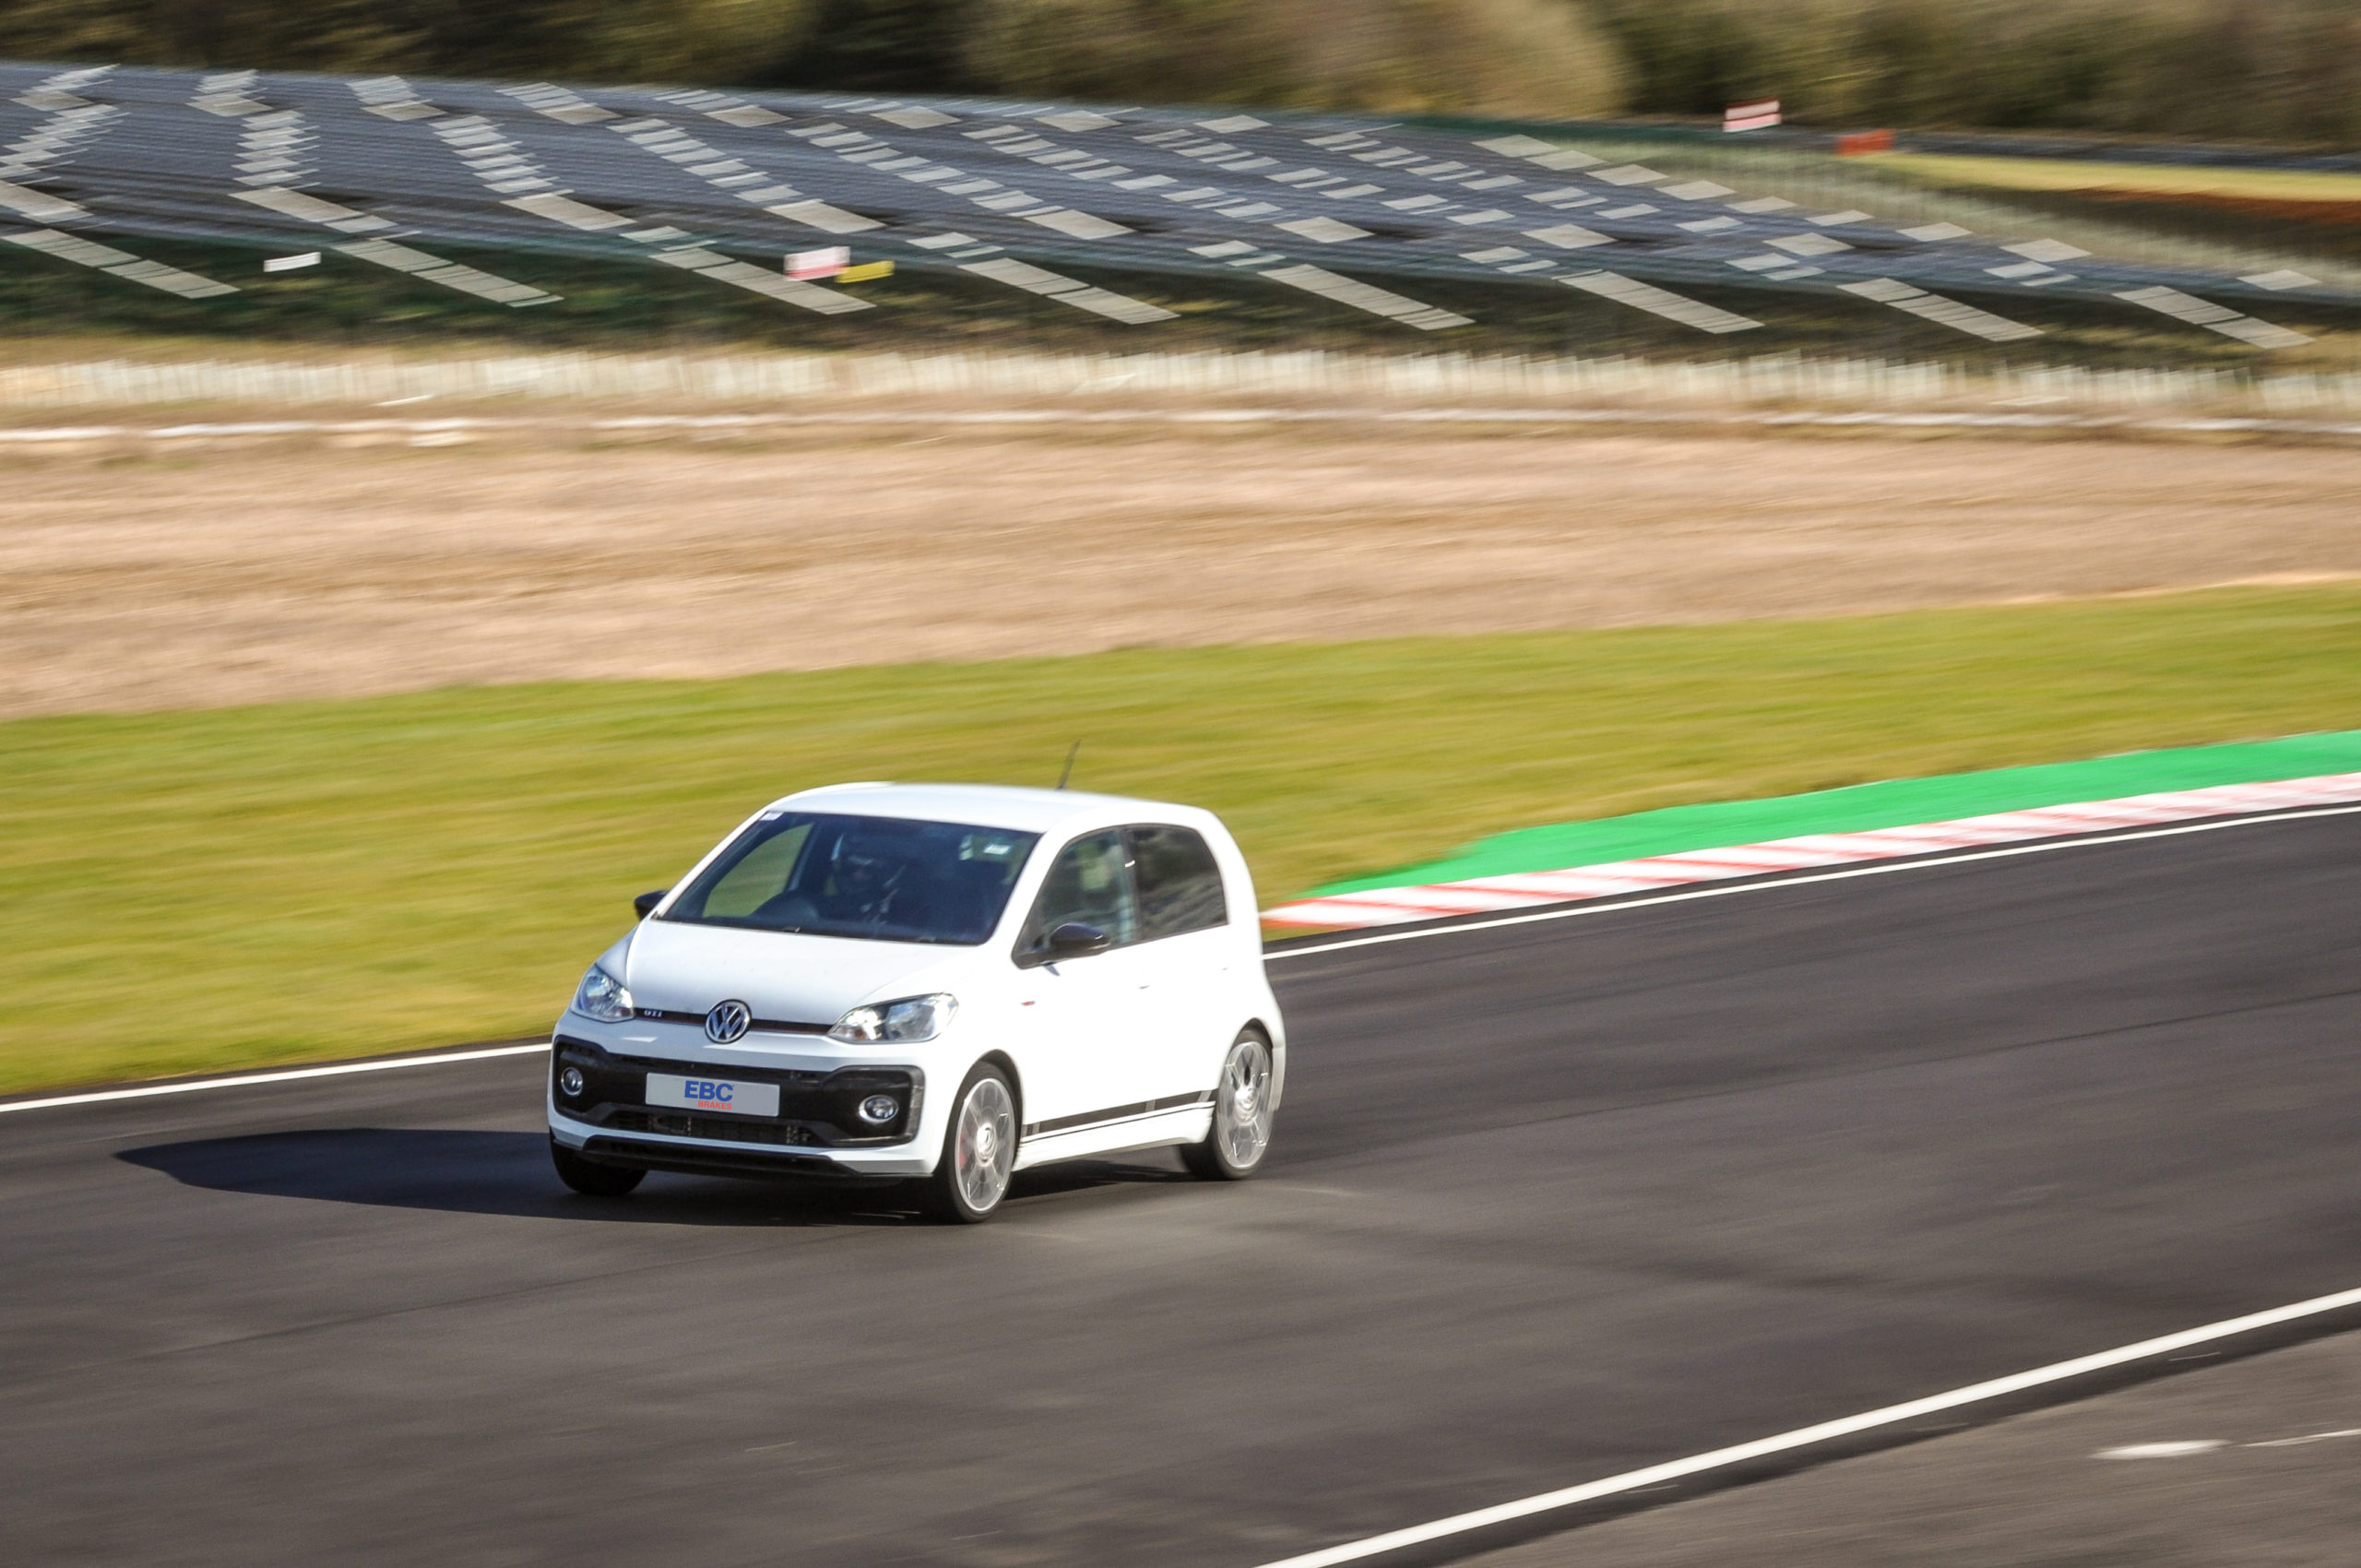 New Range of High-Performance Braking Components for VW up! GTI